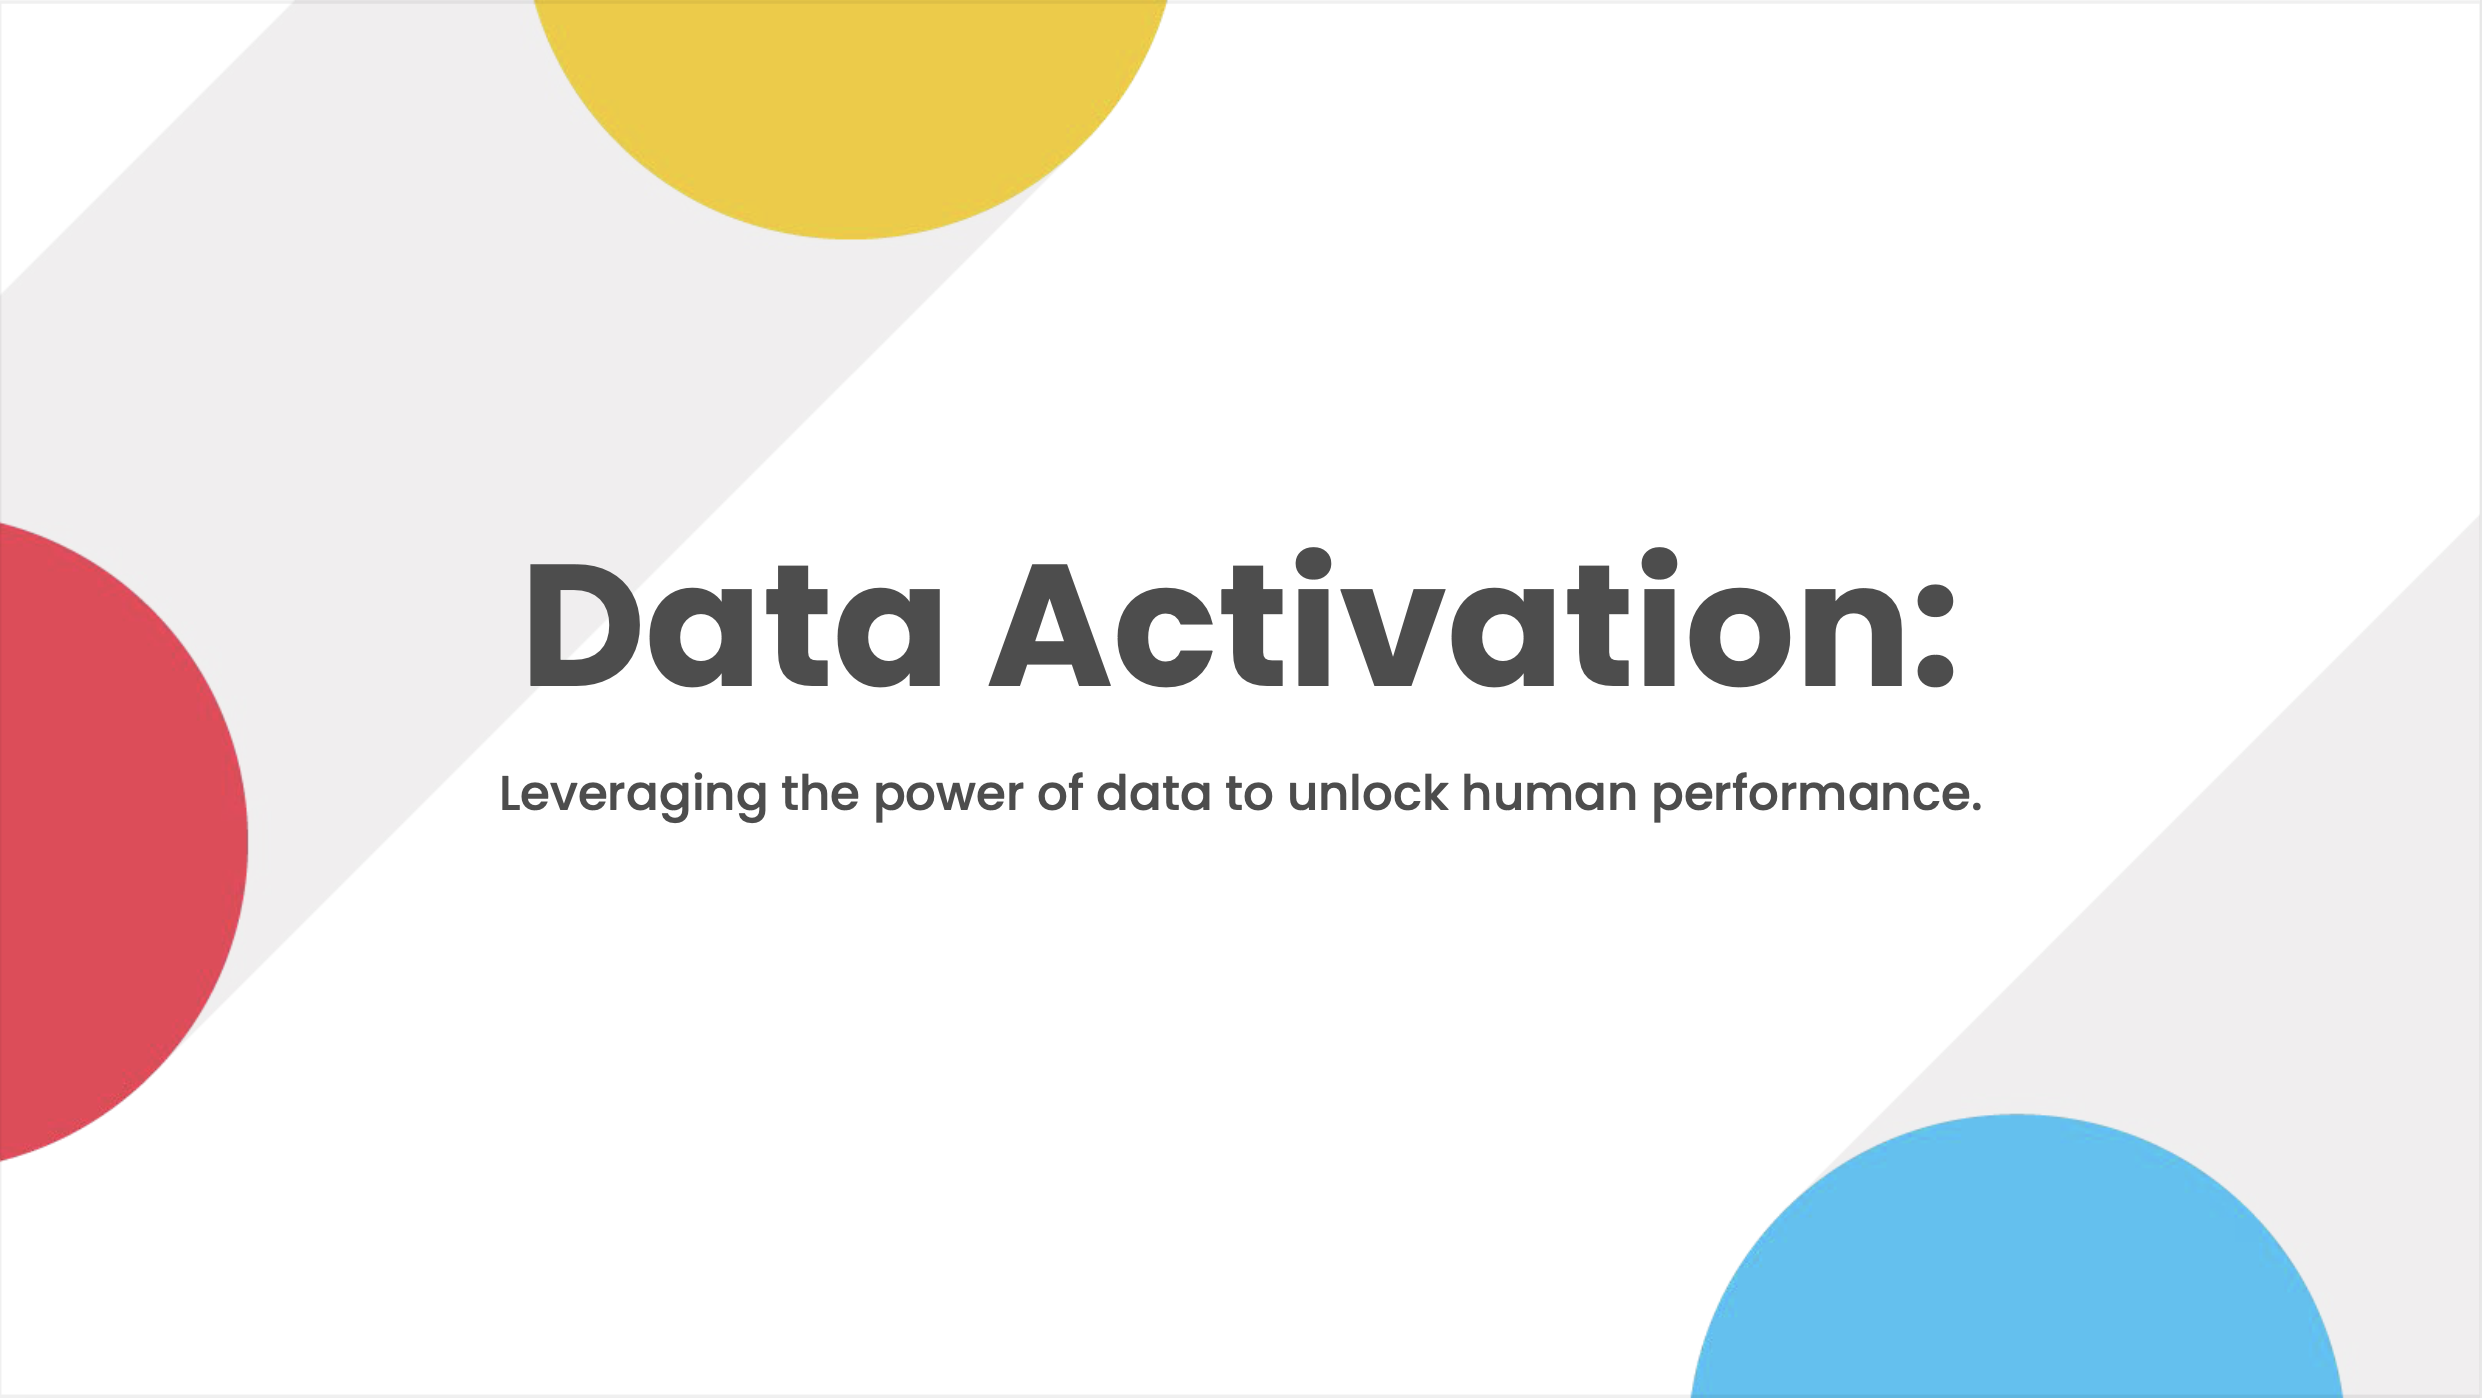 Data Activation: Leveraging the Power of Data to Unlock Human Performance